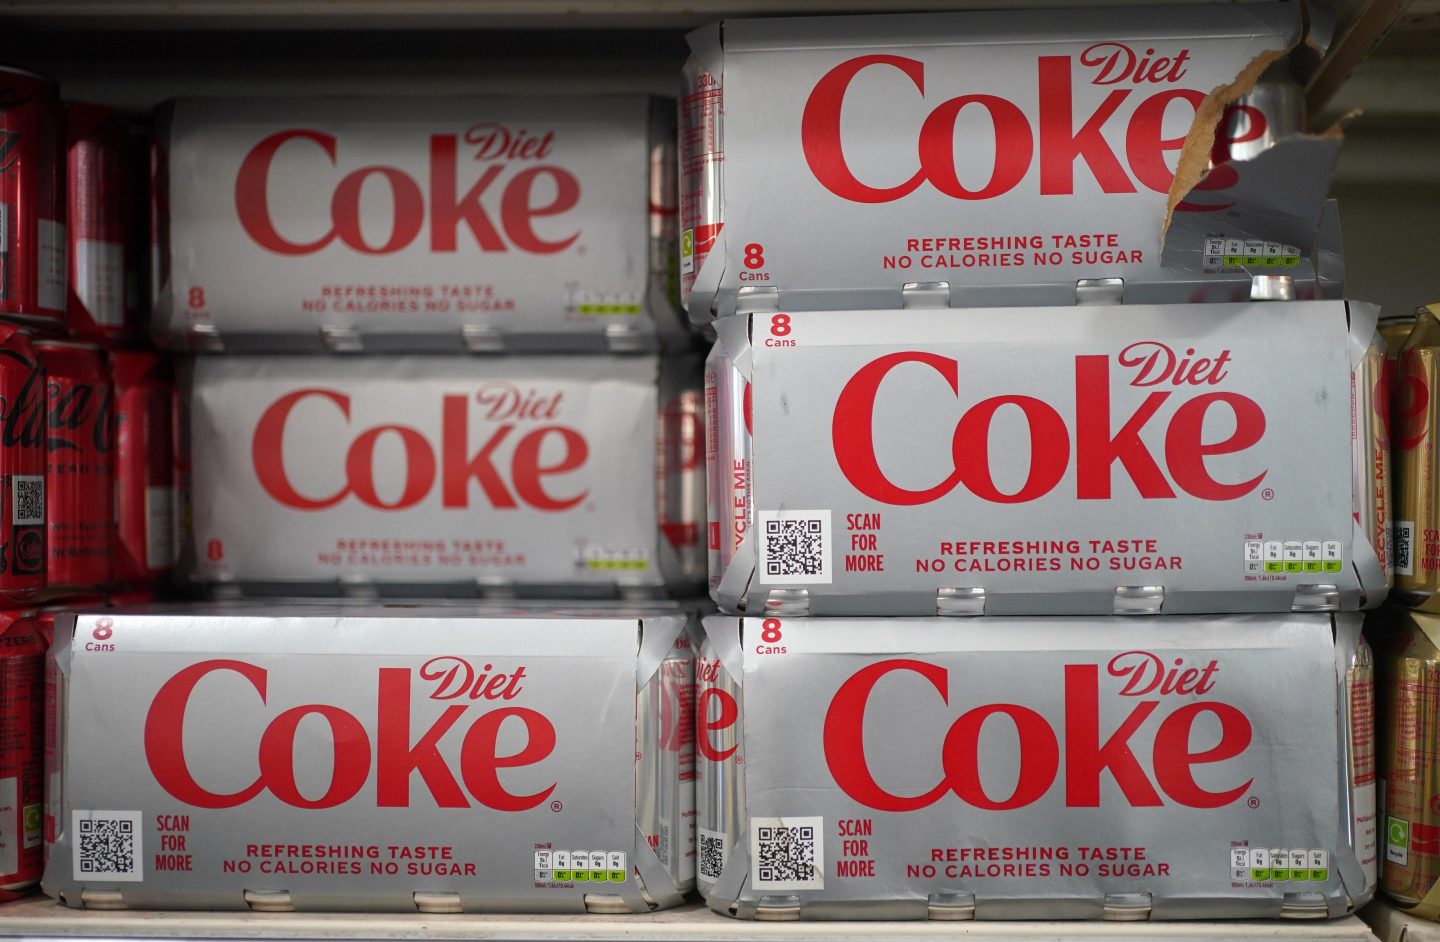 A report from a branch of the WHO has established how much Diet Coke it is safe to drink before it becomes a health risk.